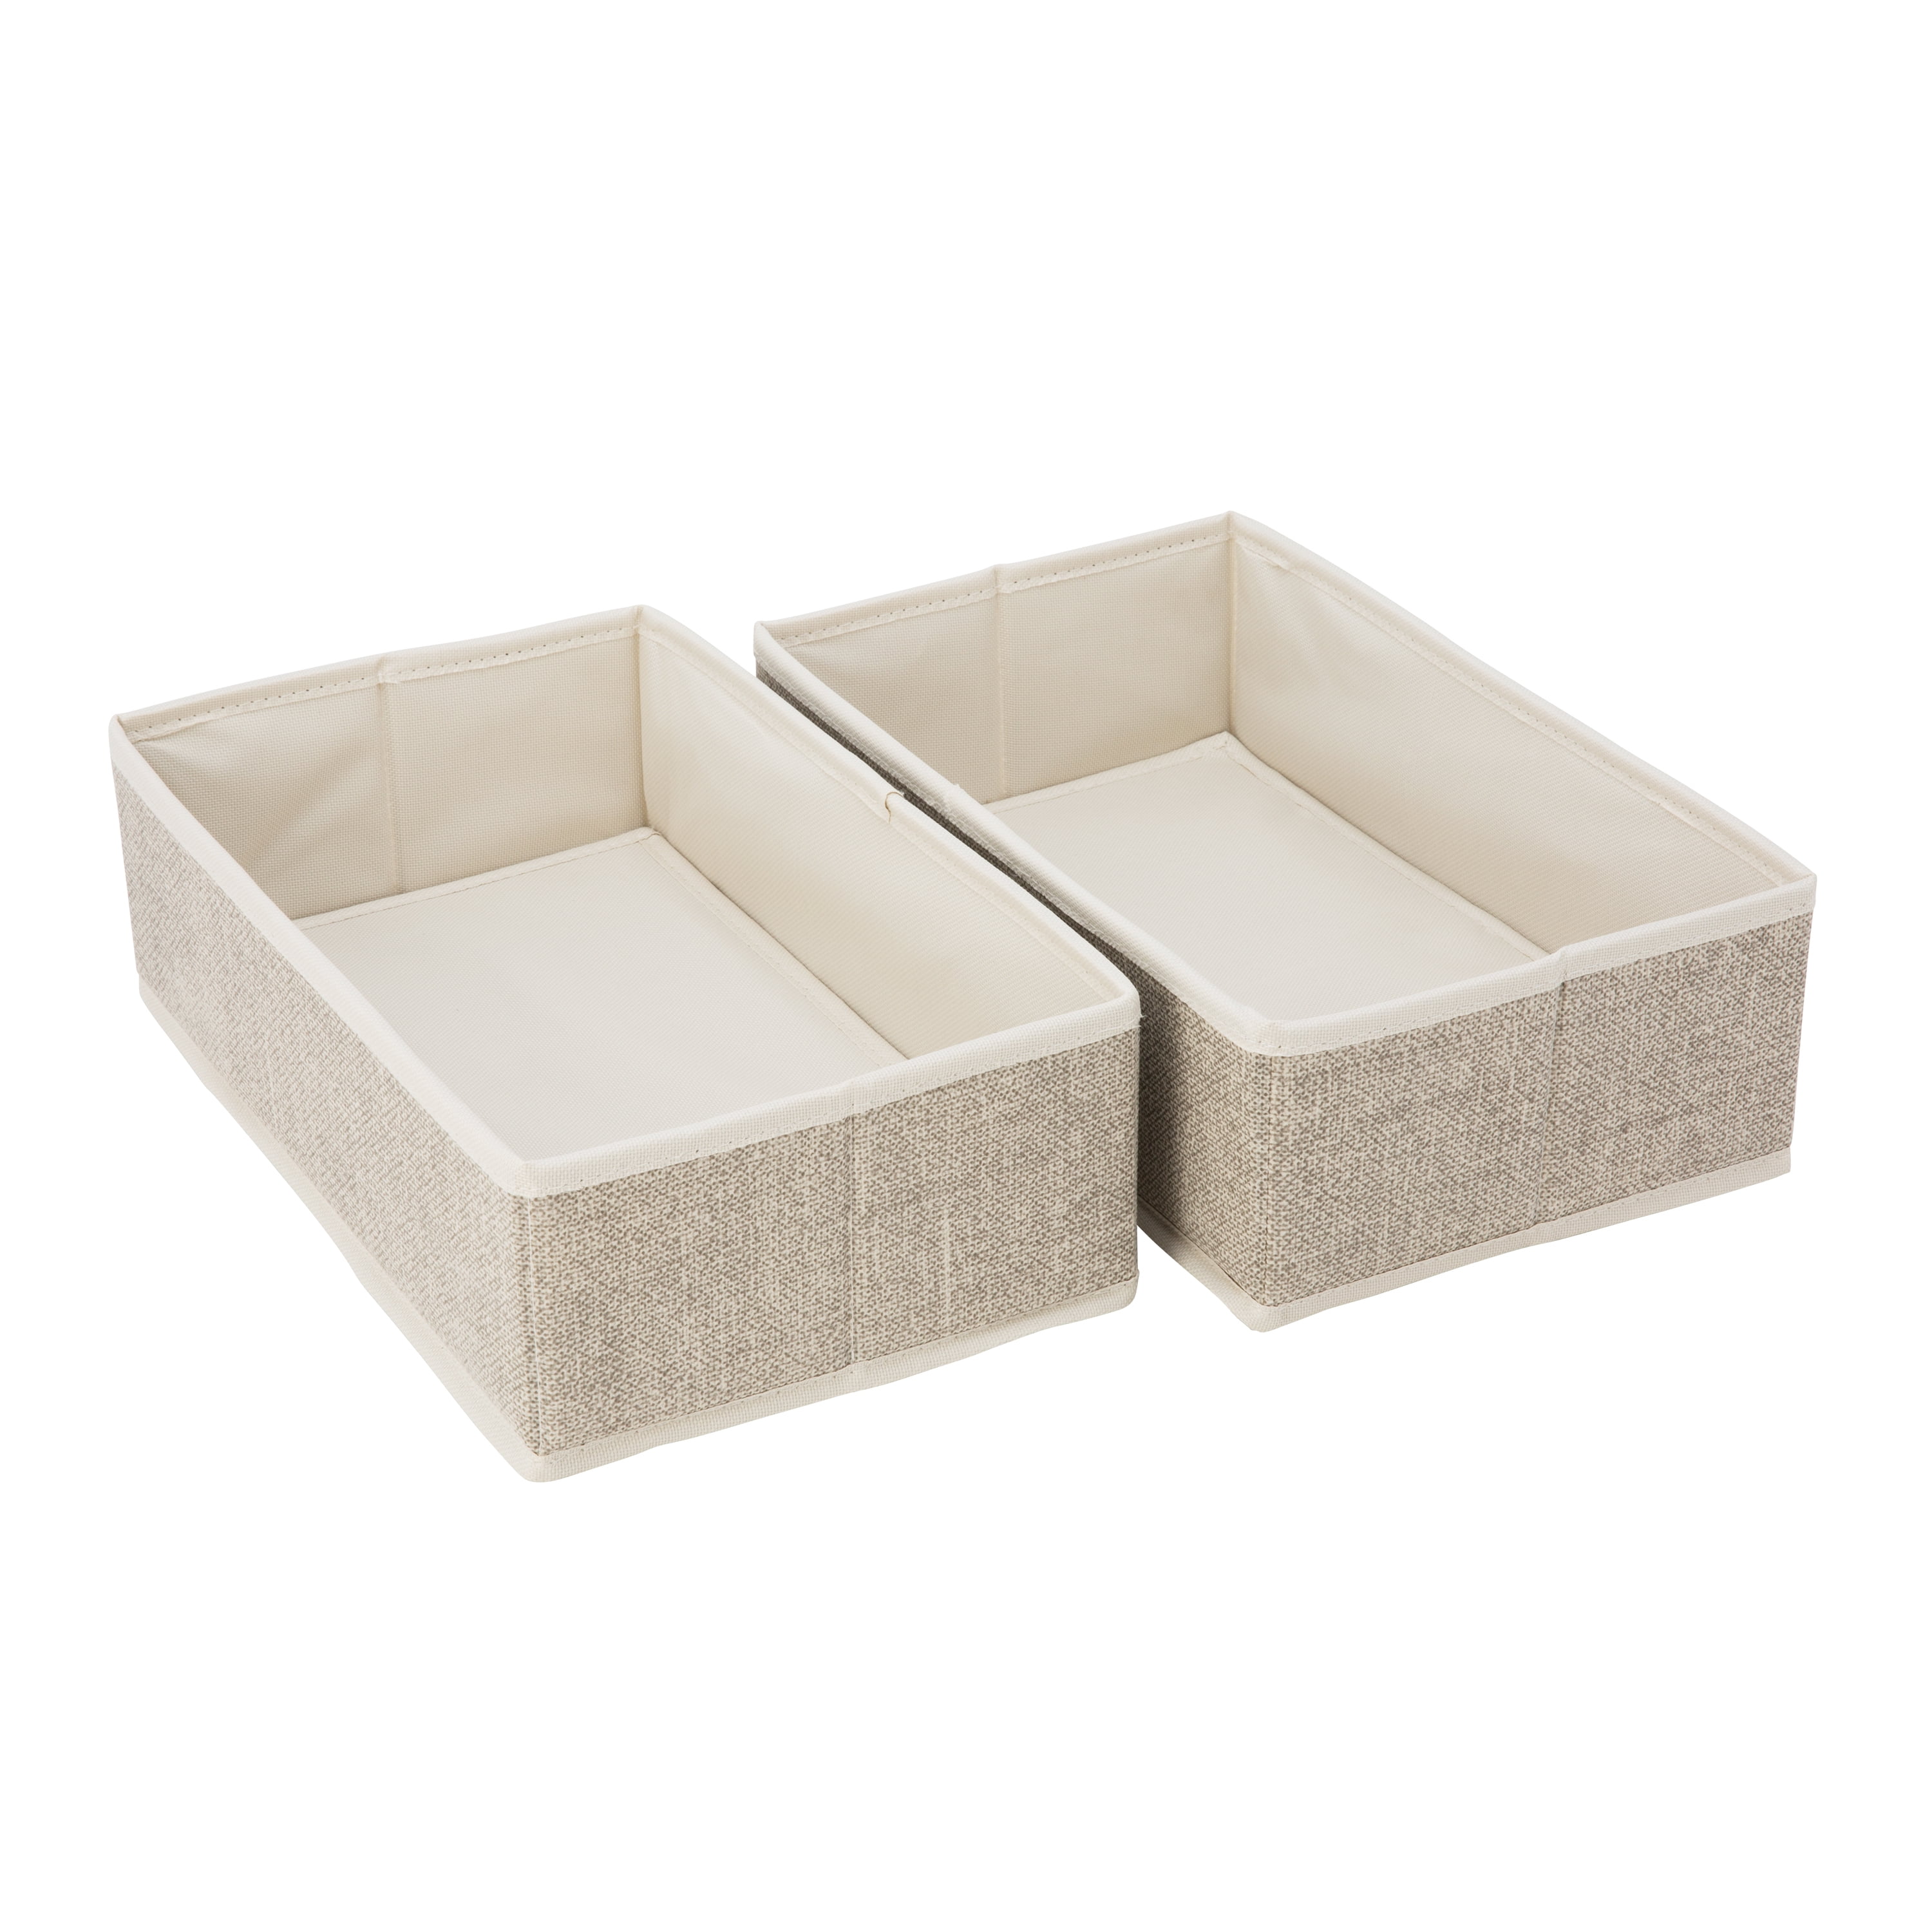 Simplify Collapsible Storage Cube in Faux Jute - Walmart.com